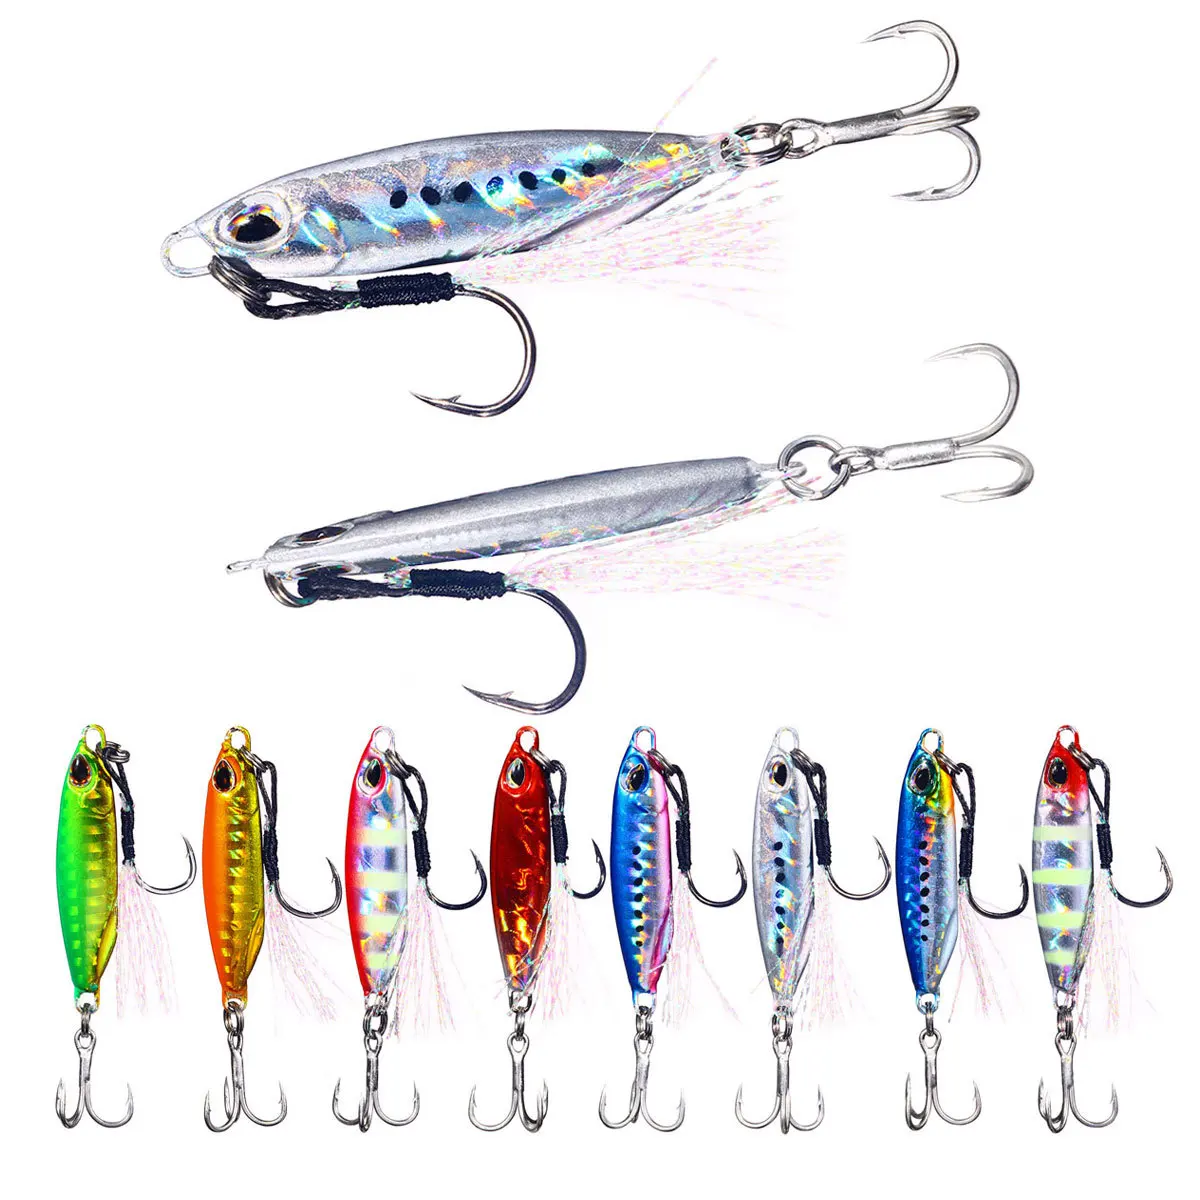 

1PC Metal Jig Spinning Sea Fishing Lure 16g 32g Slow Jig Shore Casting Jigging Lure Trout Tuna Fish Artificial Bait Tackle Lures